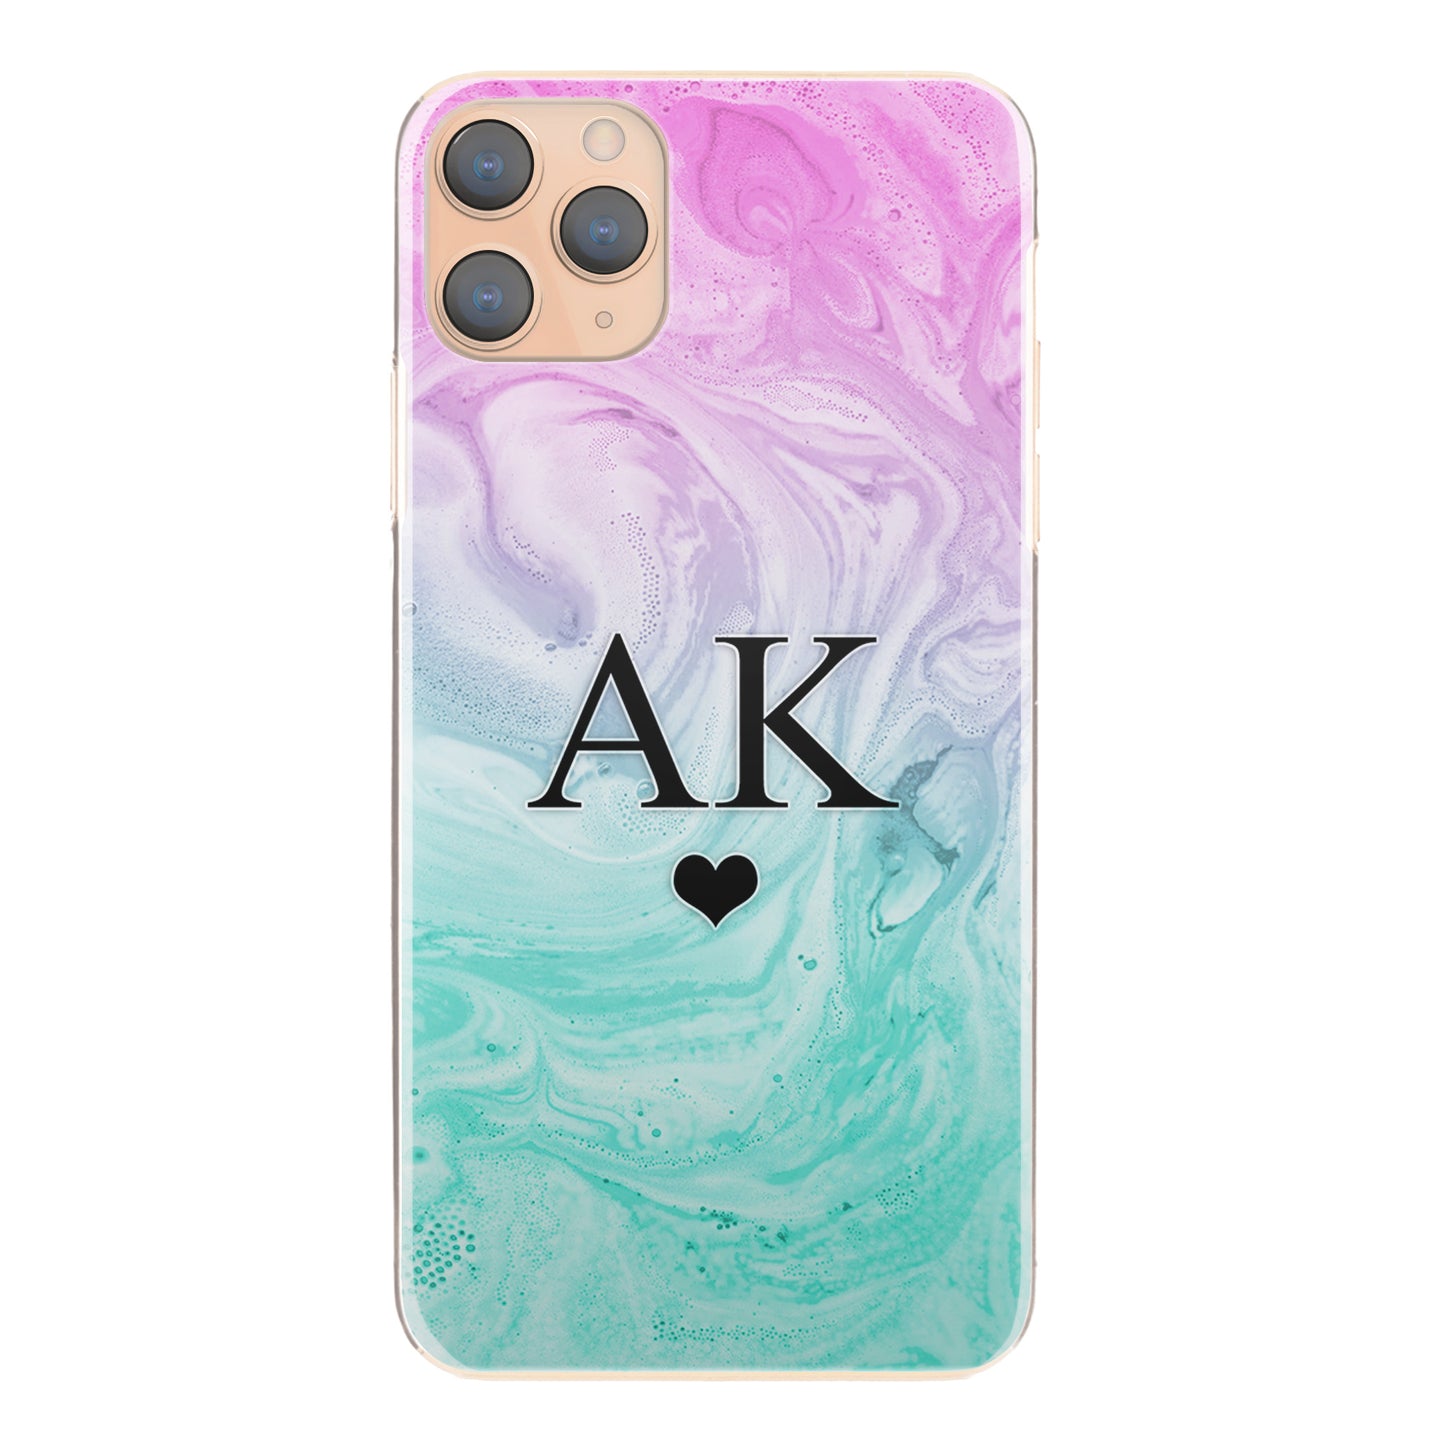 Personalised LG Phone Hard Case with Heart Accented Initials on Cyan Magenta Gradient Swirled Marble